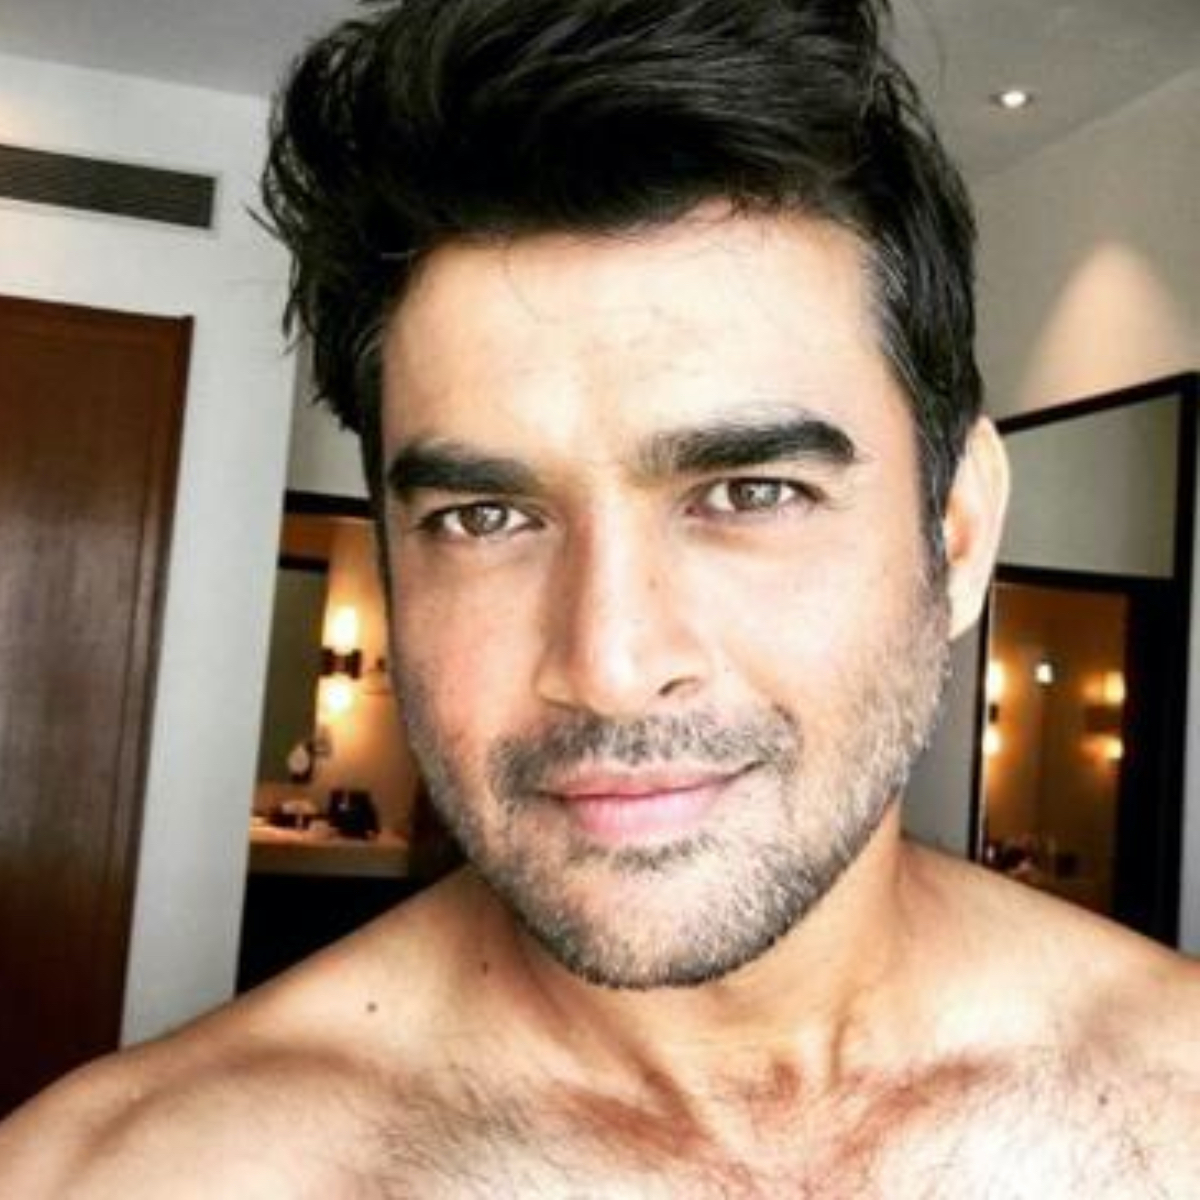 EXCLUSIVE: R Madhavan on 'shower selfie' which left female fans dizzy: Sarita warned me to not put such pics